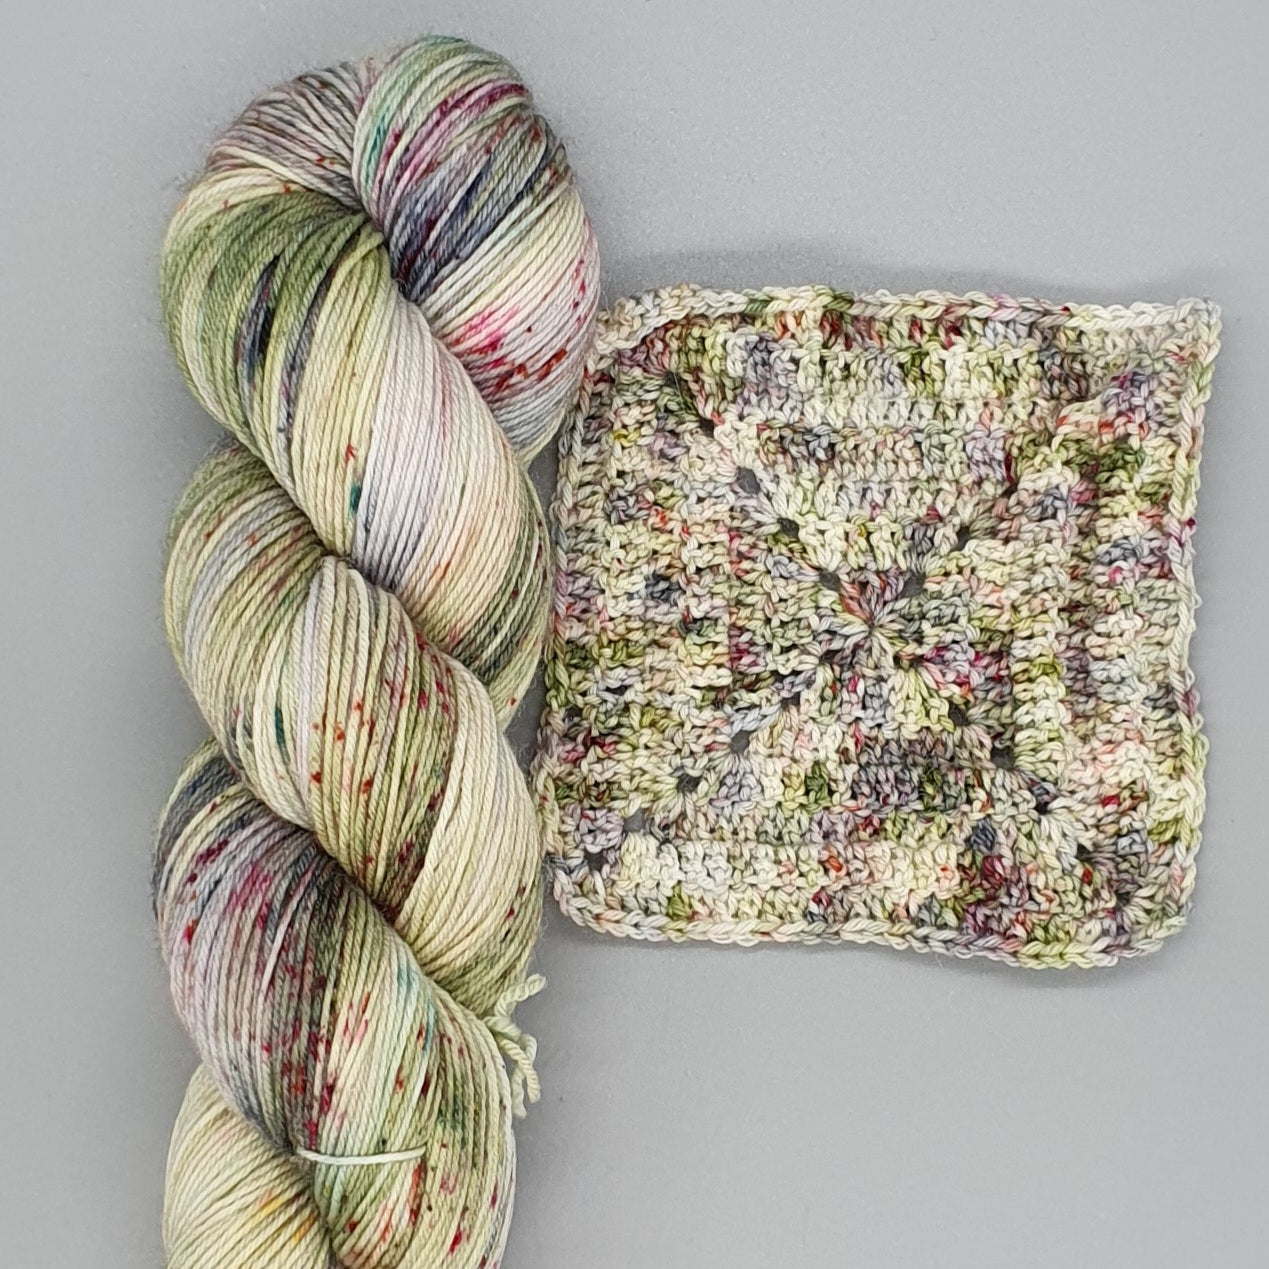 The Tale Of The Pie And The Patty-Pan - Merino Nylon DK